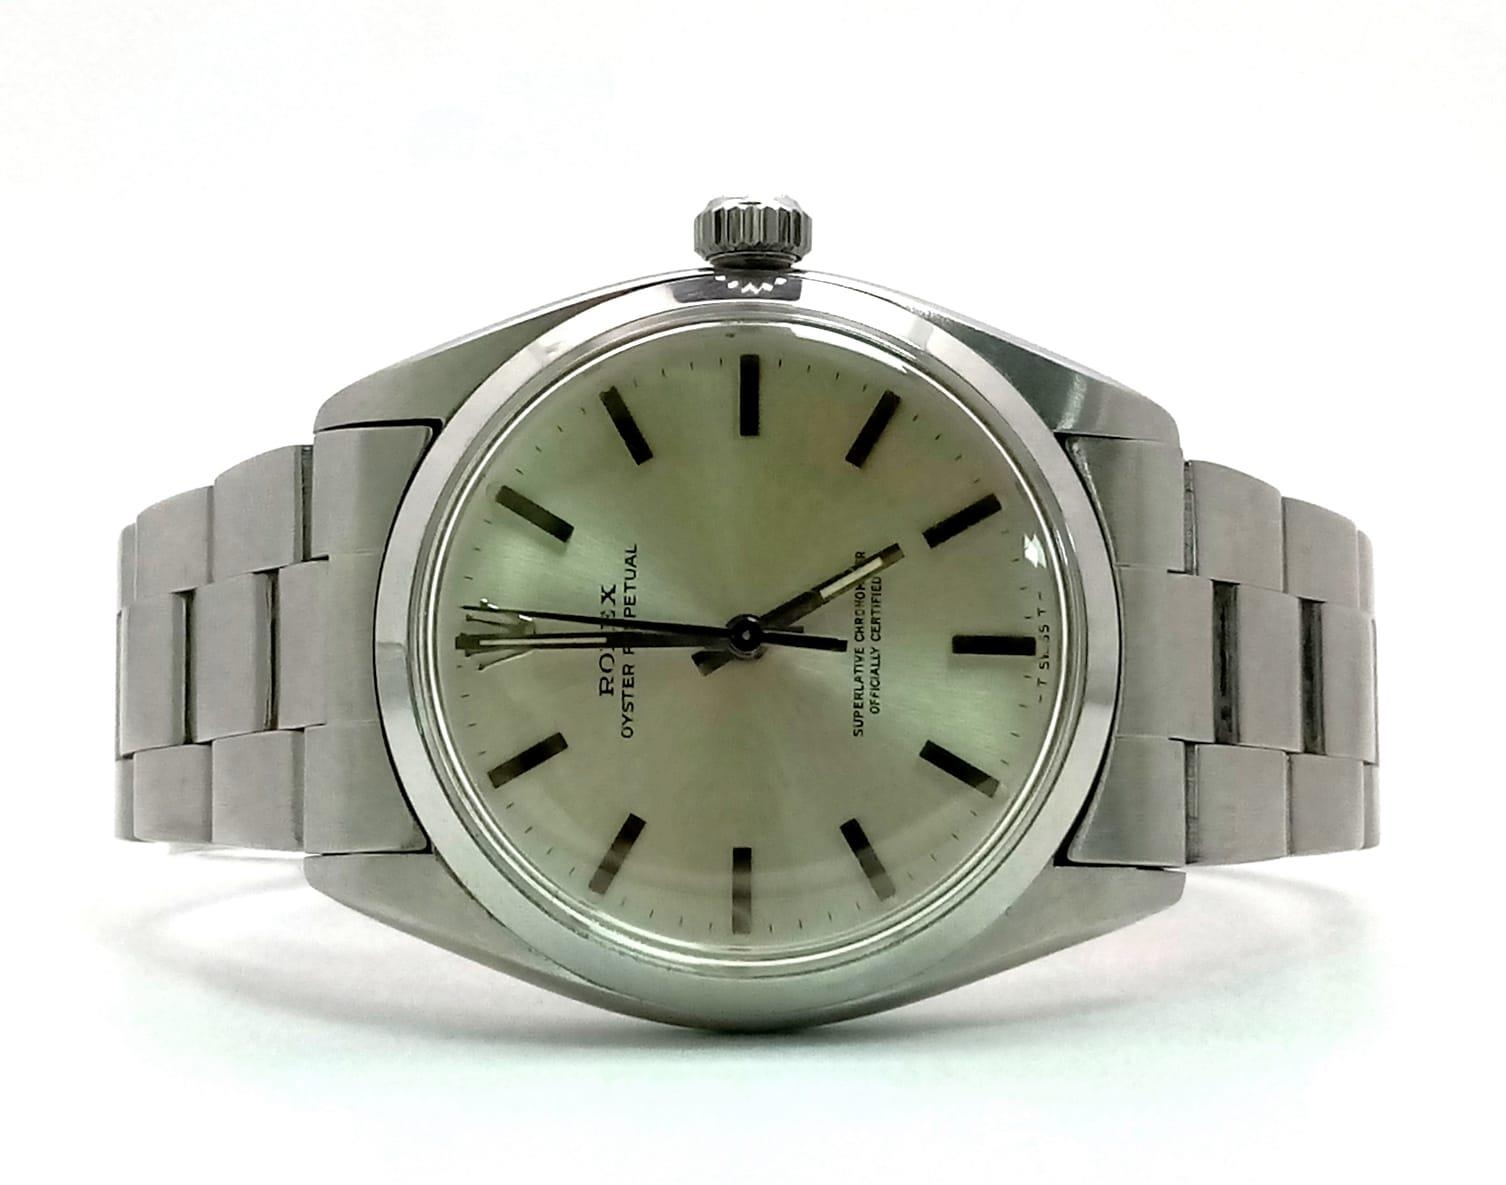 A Vintage Rolex Oyster Perpetual Gents Watch. Stainless steel bracelet and case - 34mm. Automatic - Image 4 of 9